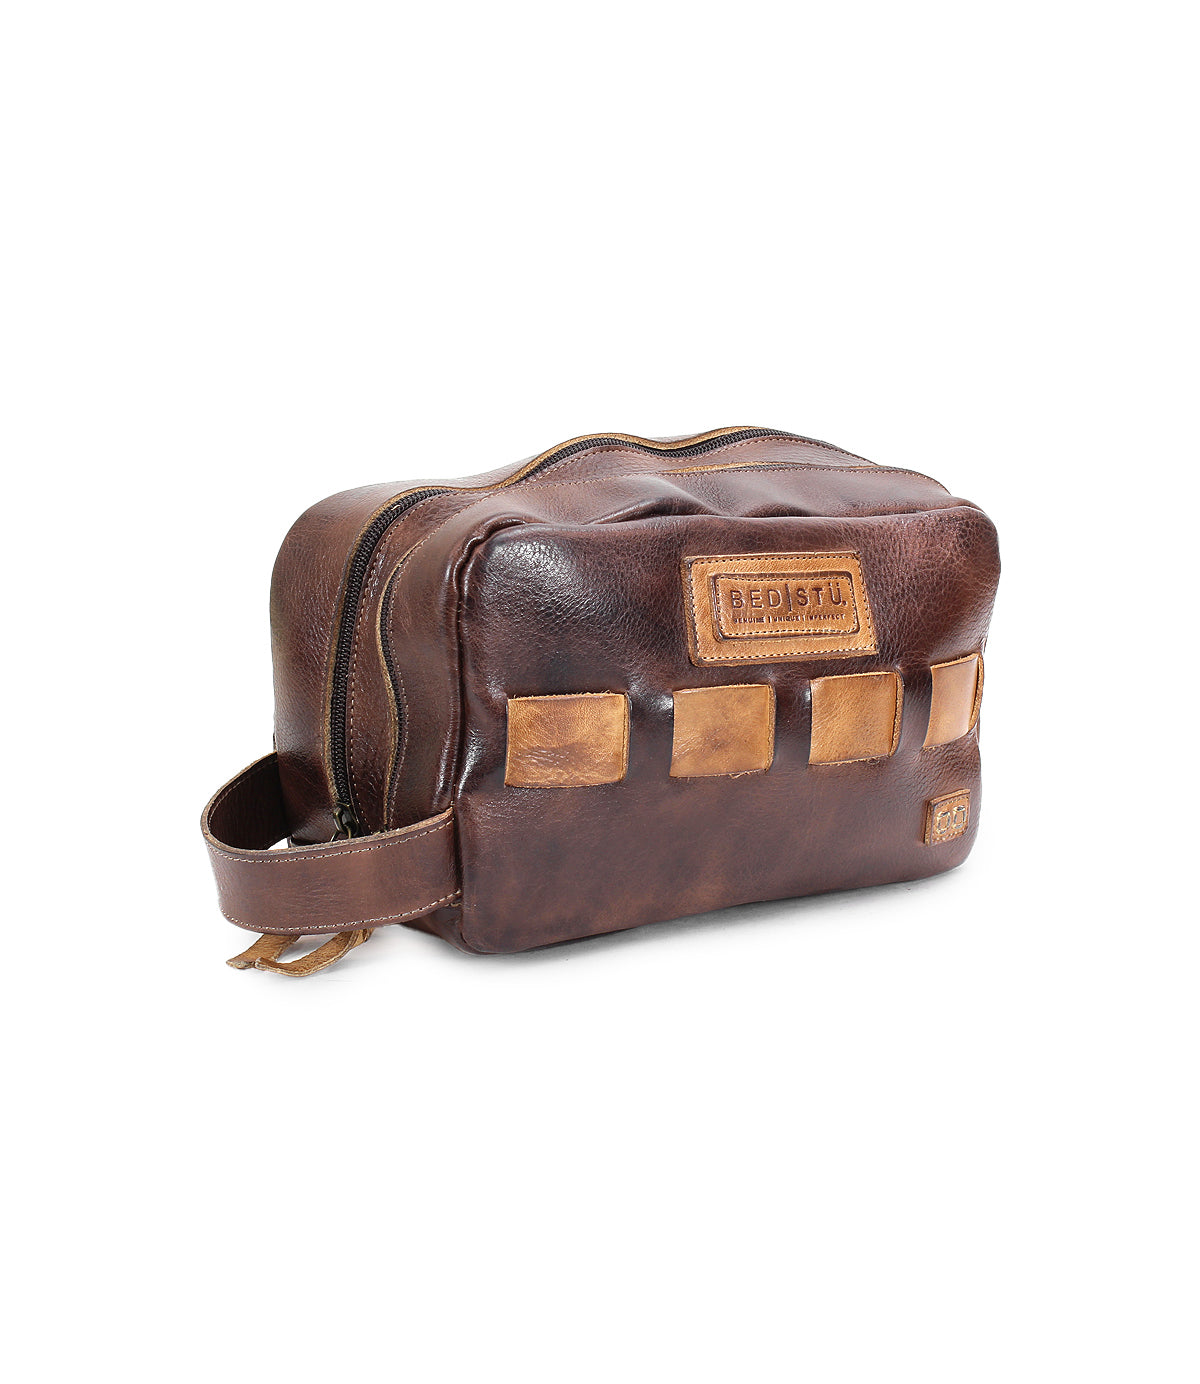 A handcrafted brown leather dopp kit with a zipper, a side handle, and decorative patches on the front. The brand "Bed Stu" is embossed on a leather patch, perfect for organizing your travel essentials. The product name is "Kip.